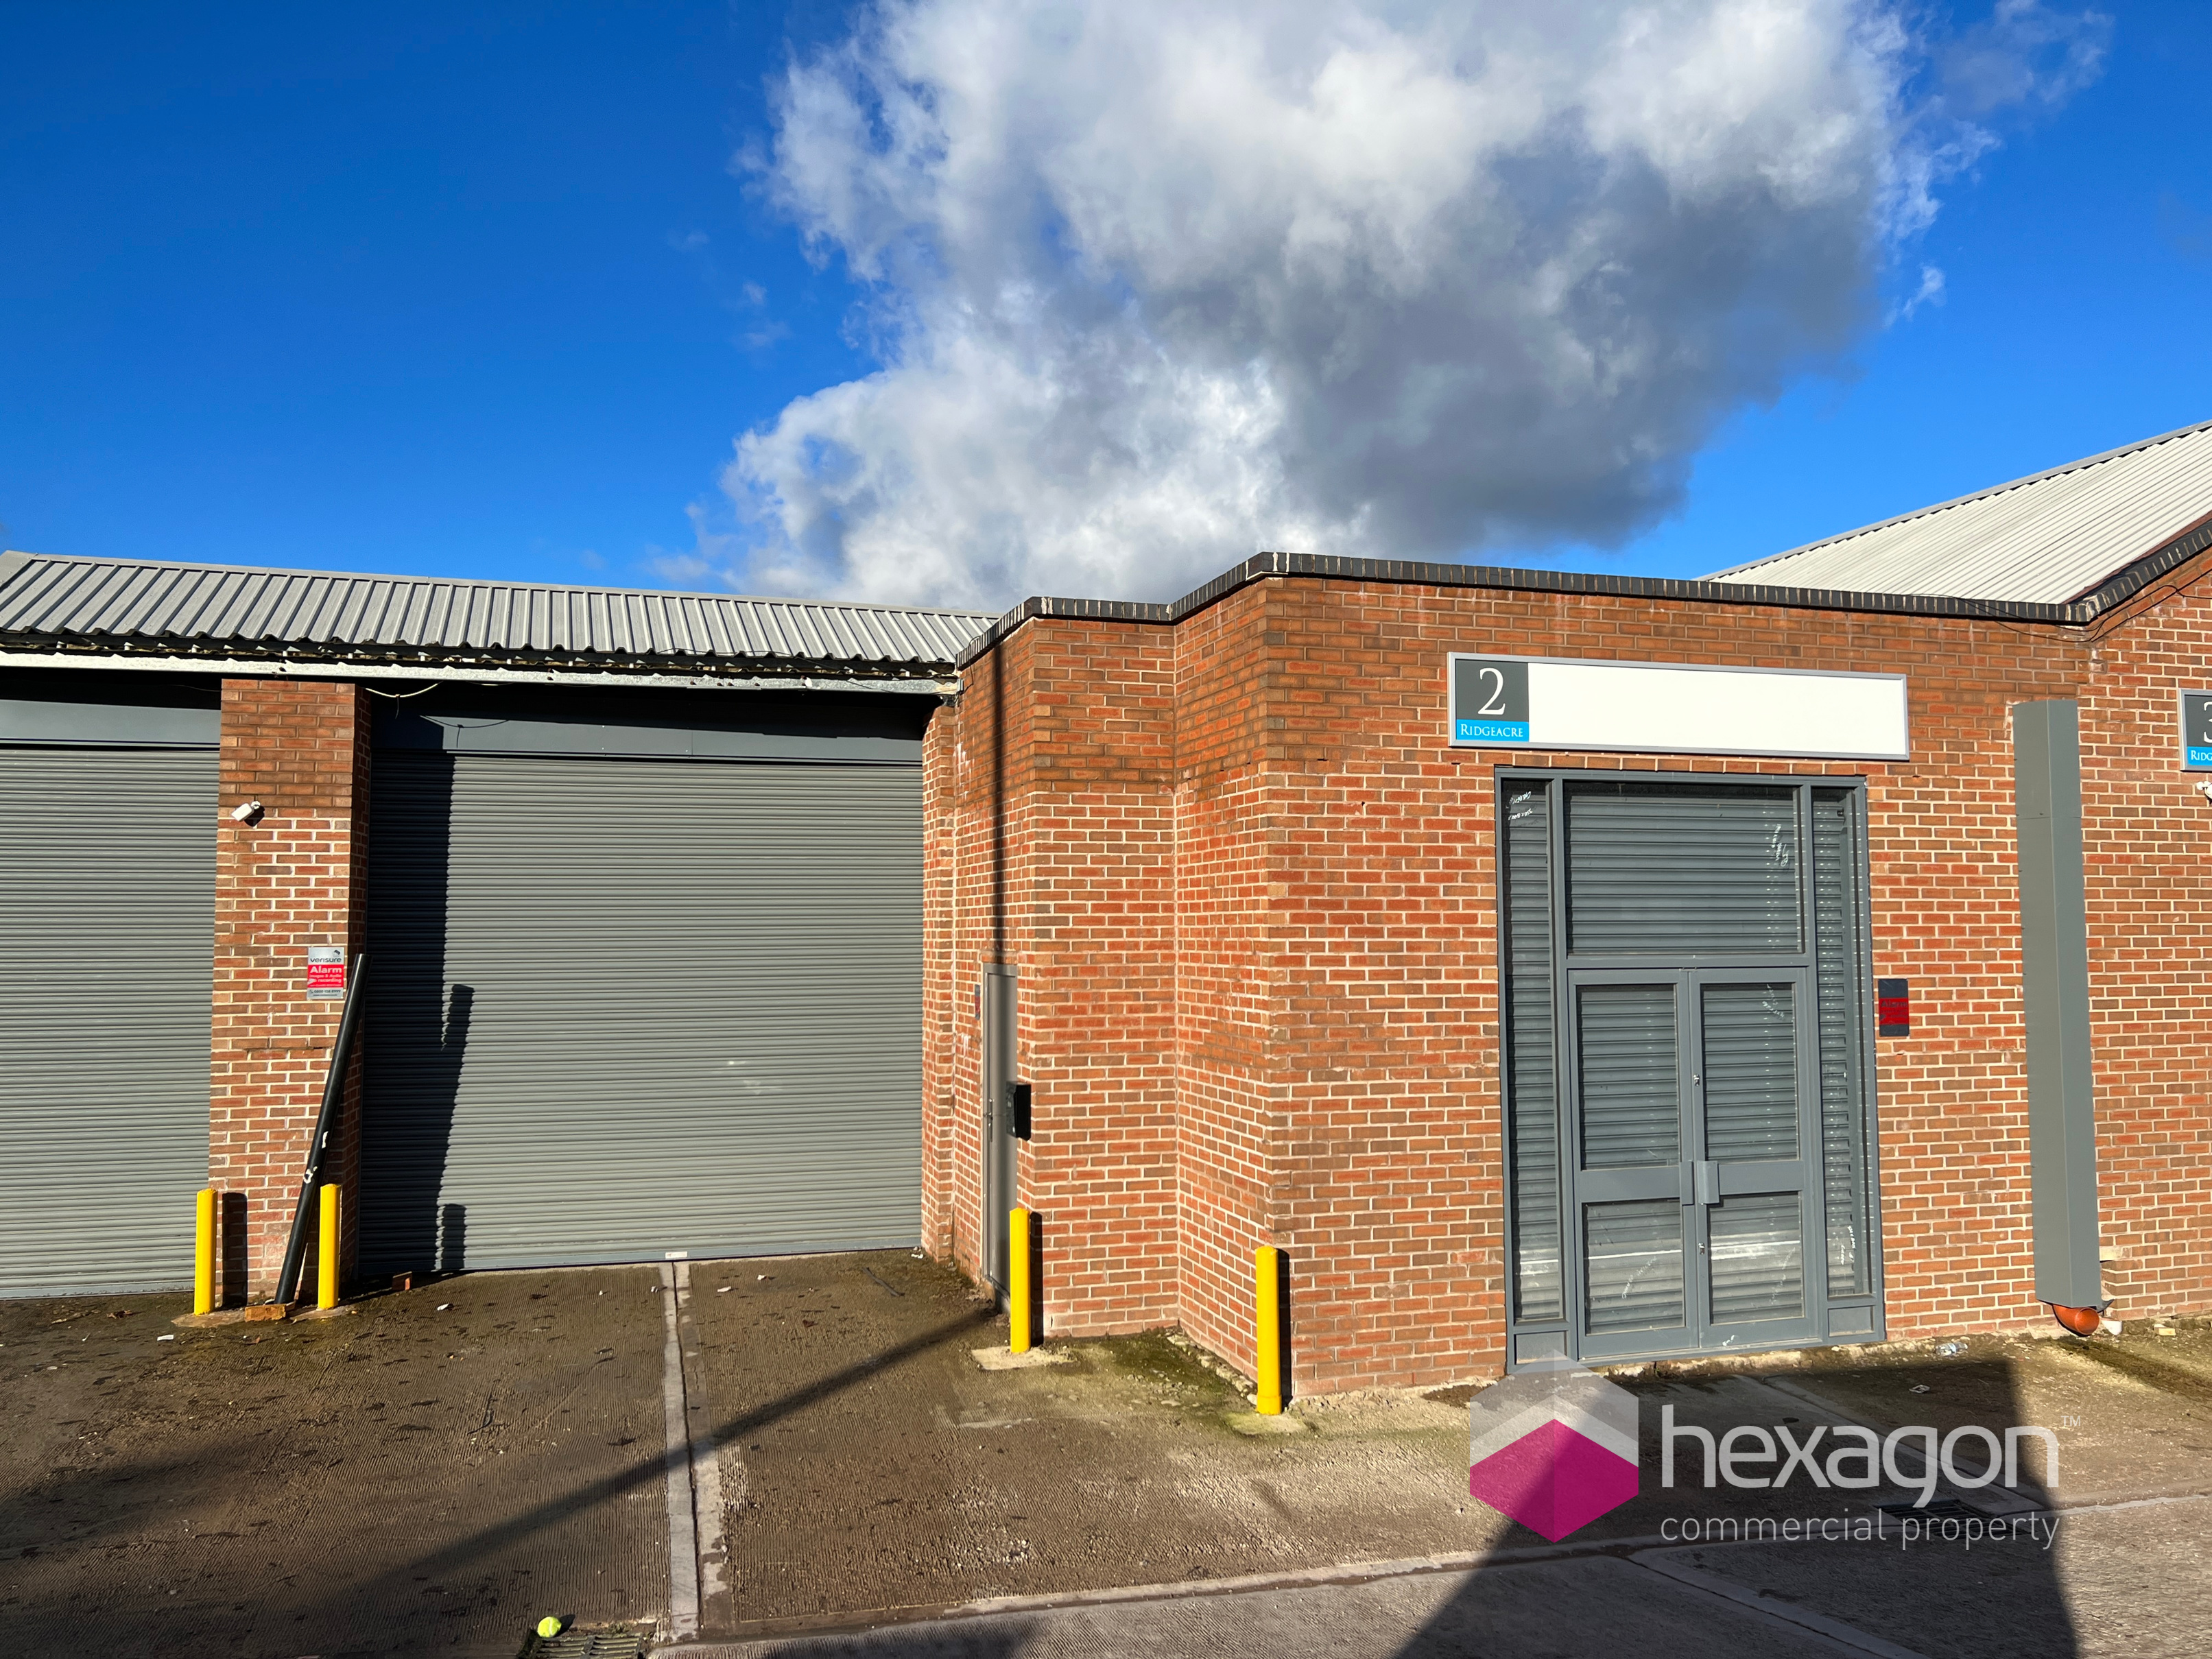 0 bed Light Industrial for rent in West Bromwich. From Hexagon Commercial Property